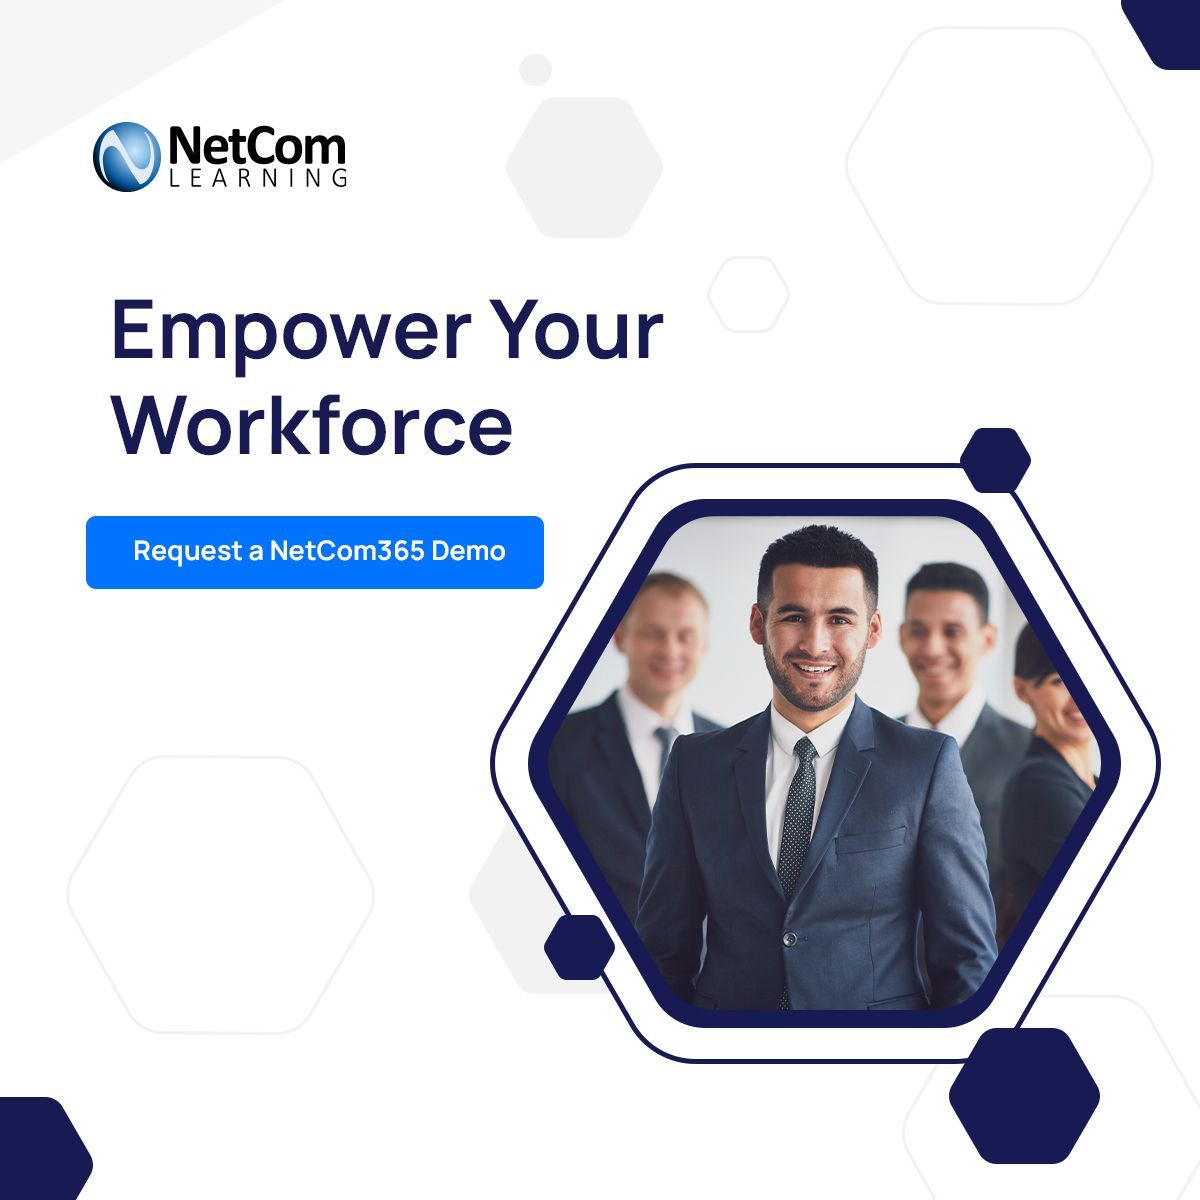 Unlock your team's potential with NetCom365. Our cutting-edge learning portal is tailored for today's tech industry 
buff.ly/3J8ZewQ 
#CorporateTraining #EmployeeUpskilling #LearningManagementSystem